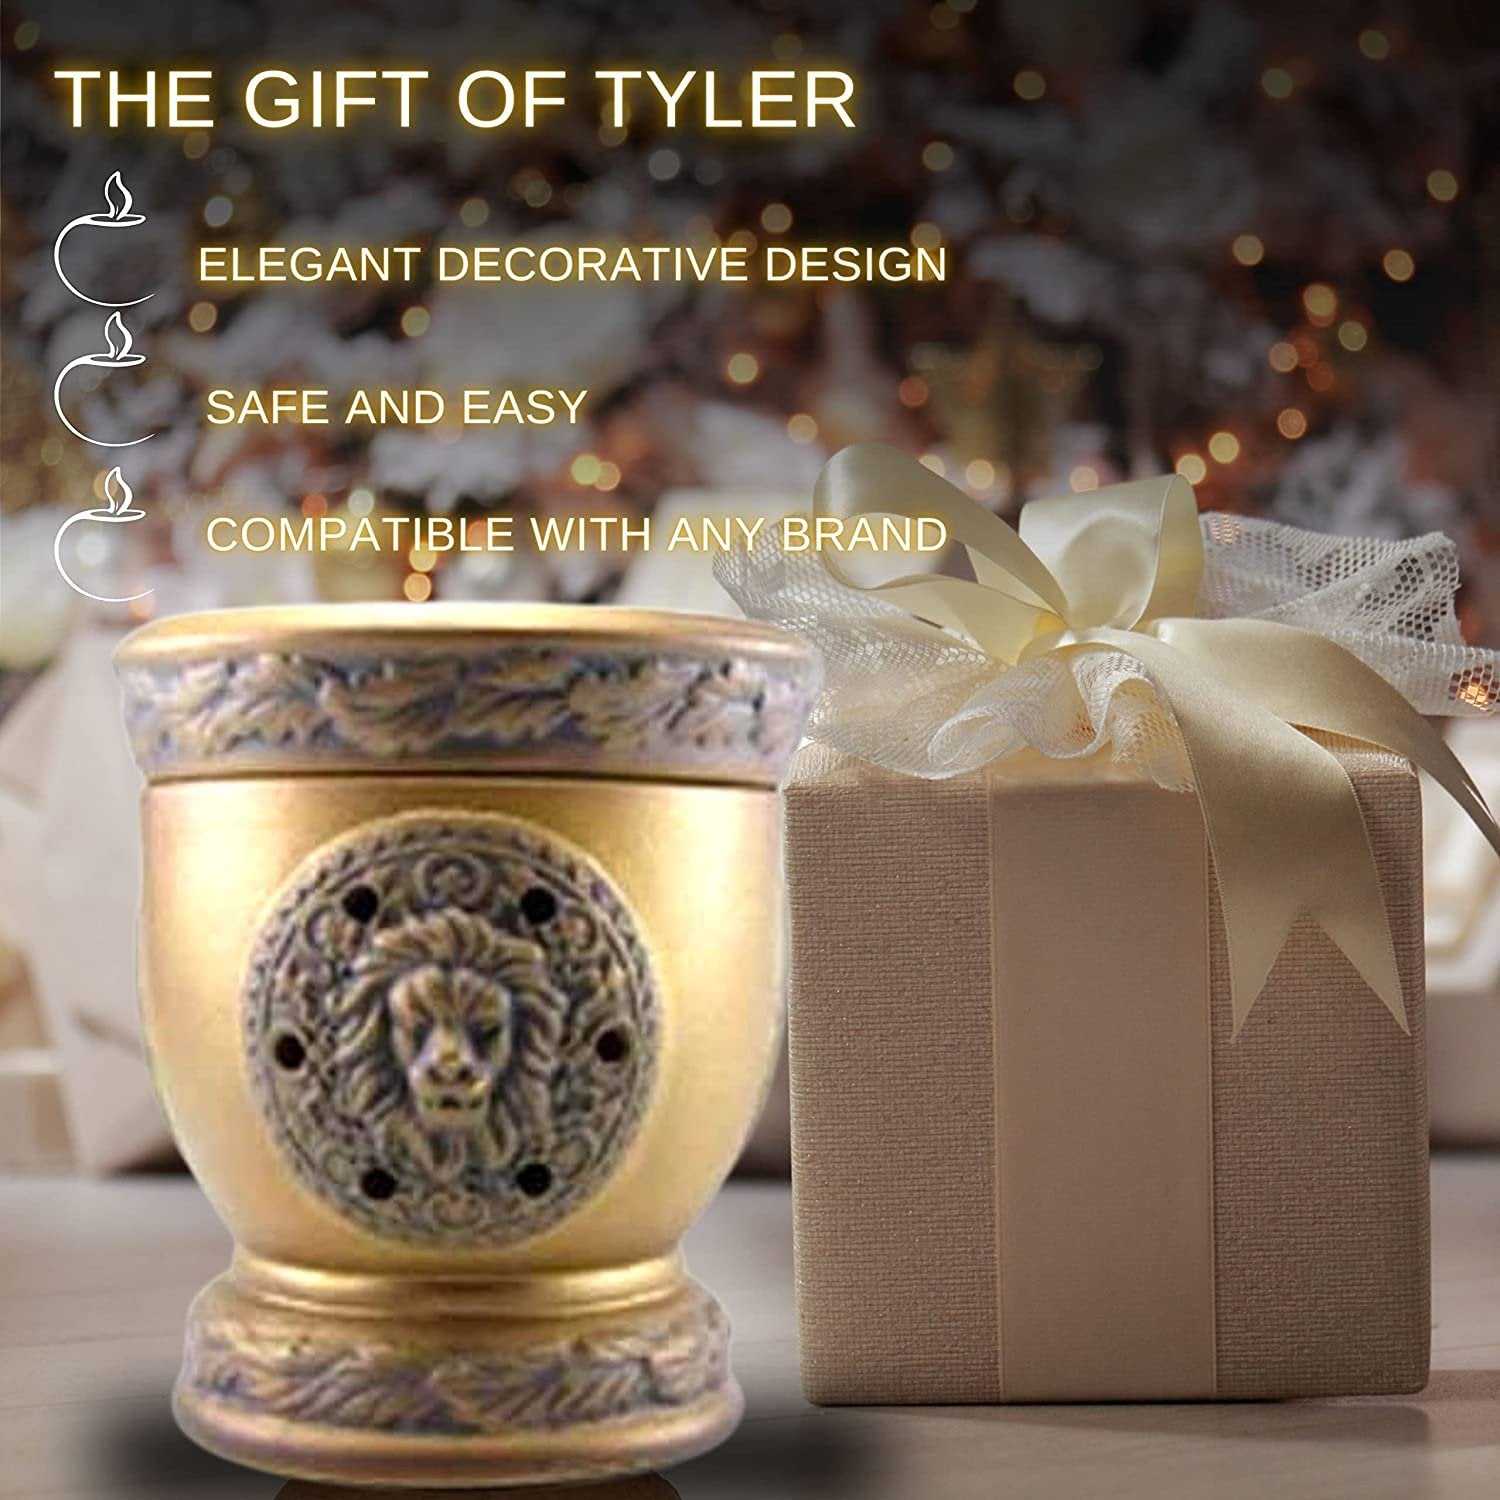 Tyler Candle Company Lionesque Matte Bronze Fragrance Wax Warmer - Candle Wax Melt Warmer - Home Decor Candle Accessories with Included 6 Diva Scent Wax Melts - 5.5 x 5" in with Bonus Key Chain